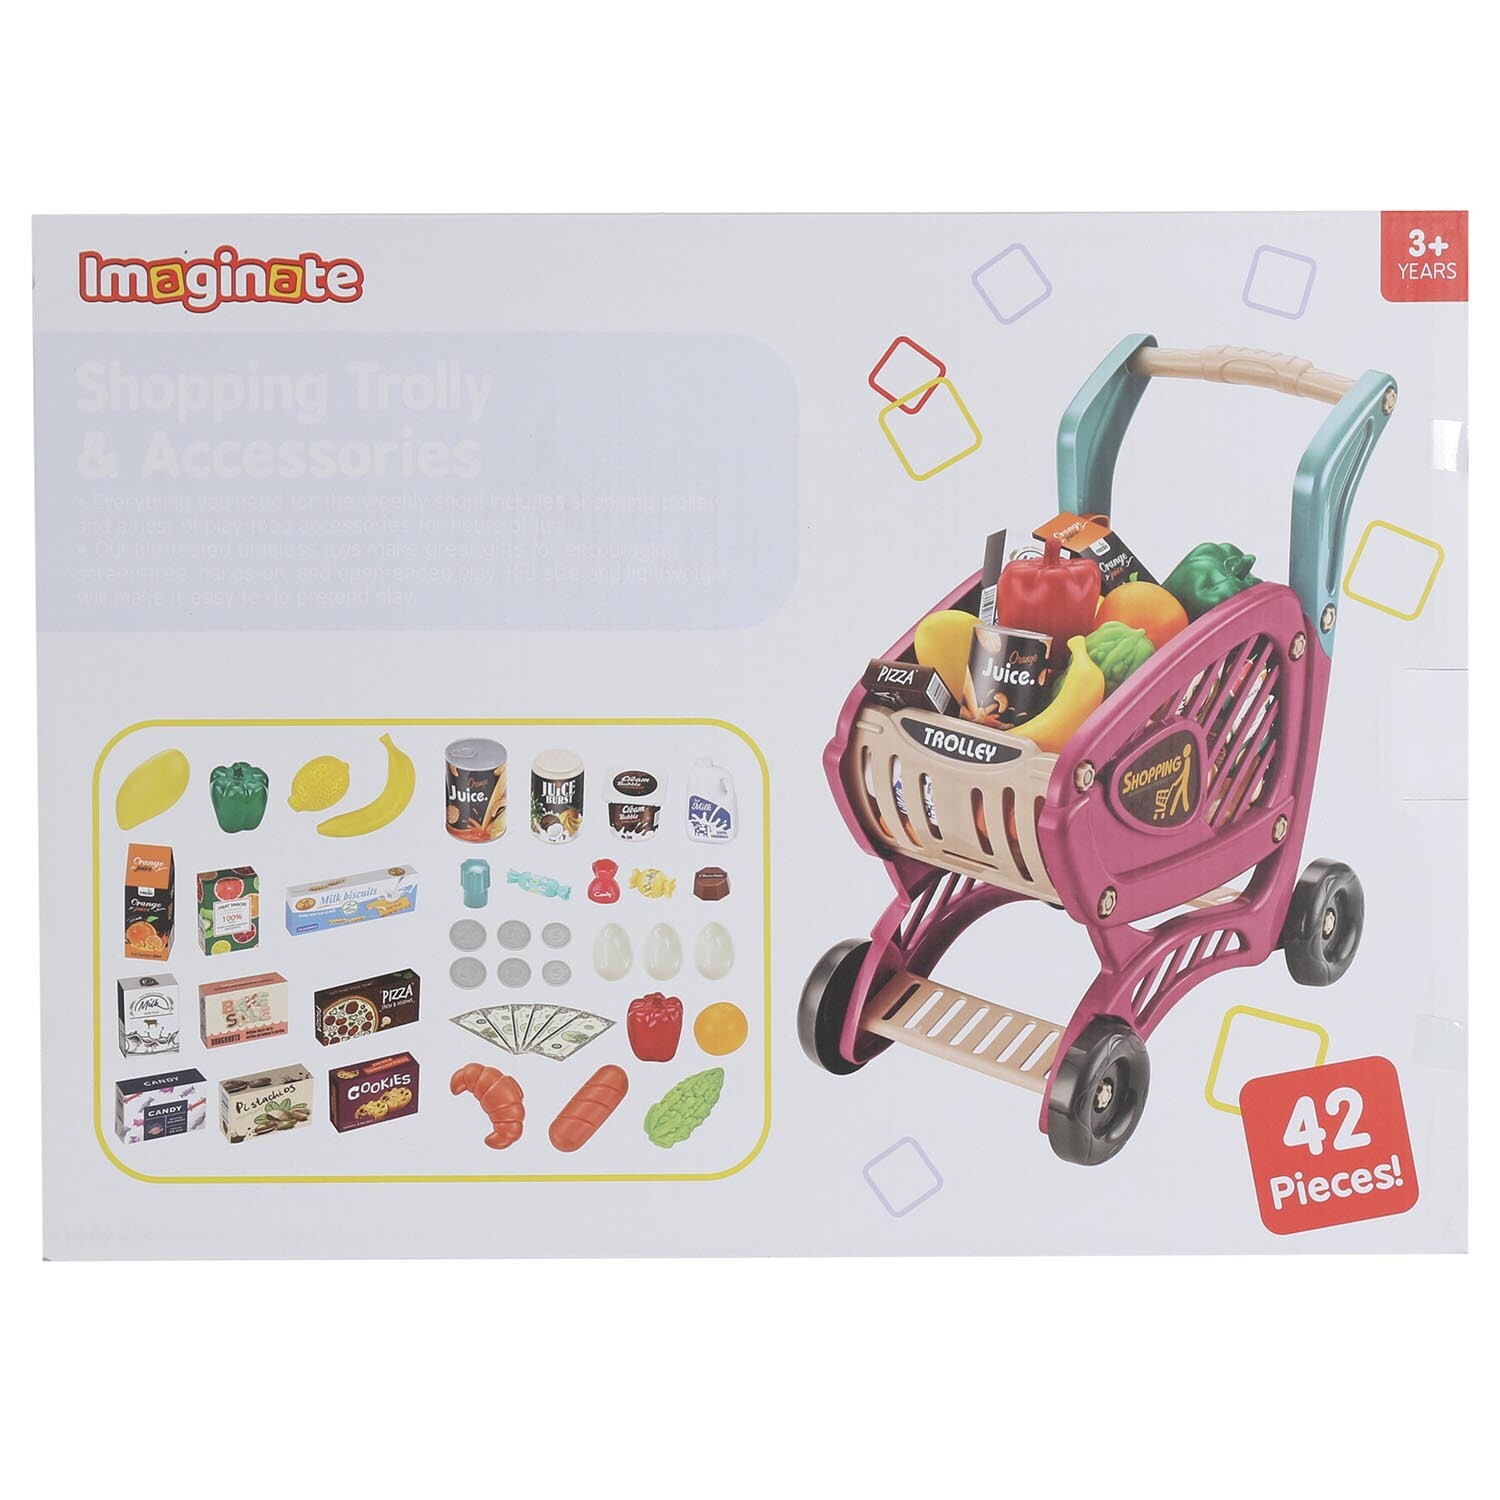 Imaginate Shopping Trolley and Accessories Kids 48 Piece Playset Image 2